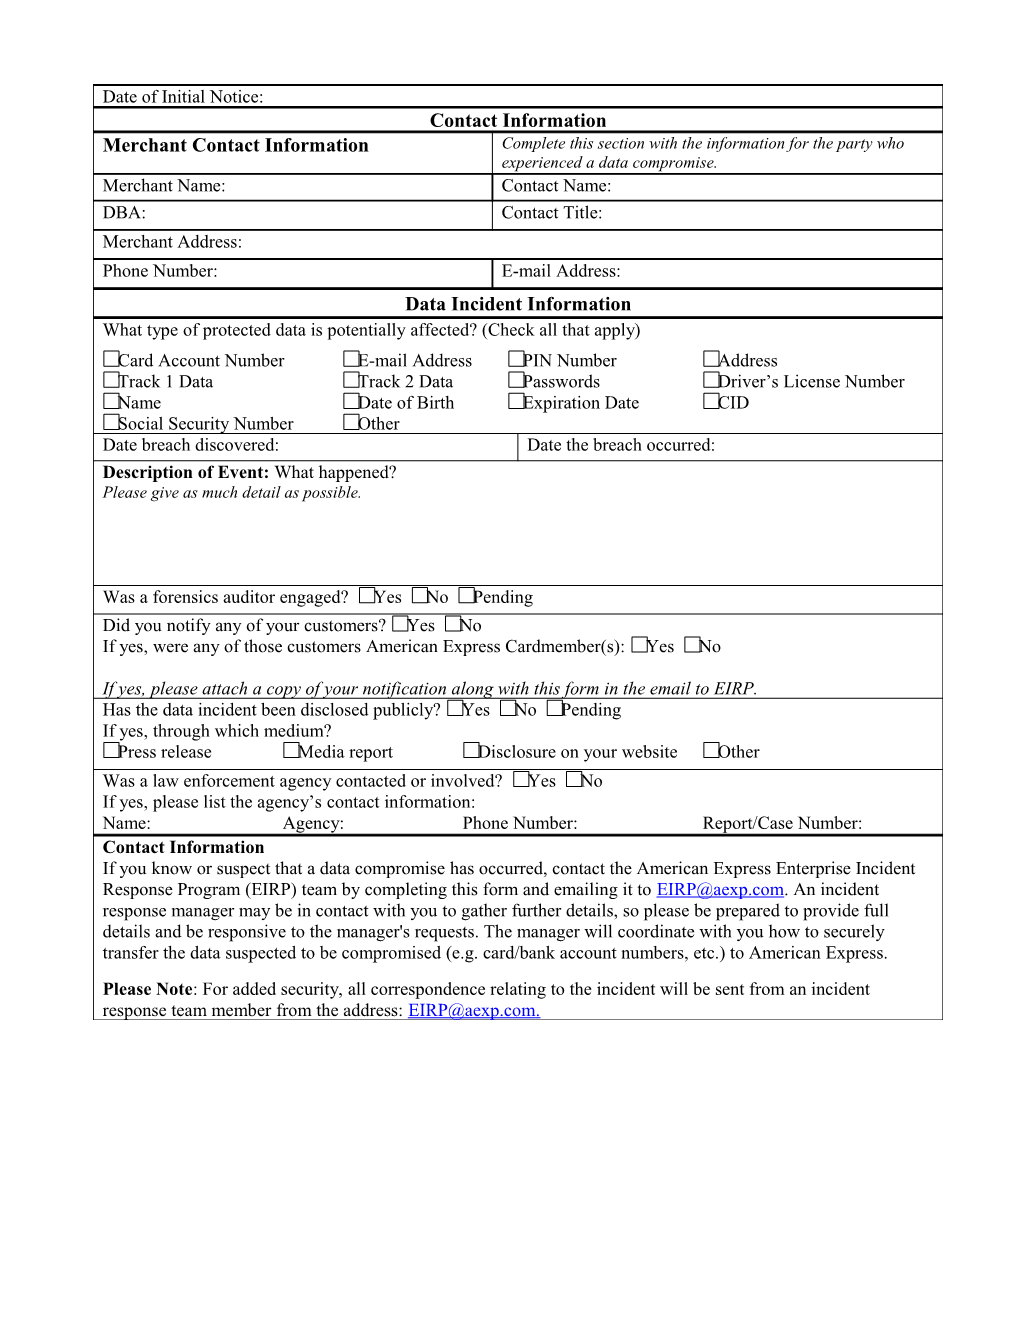 Please Fill out the Following Information As It Pertains to the Incident You Are Reporting